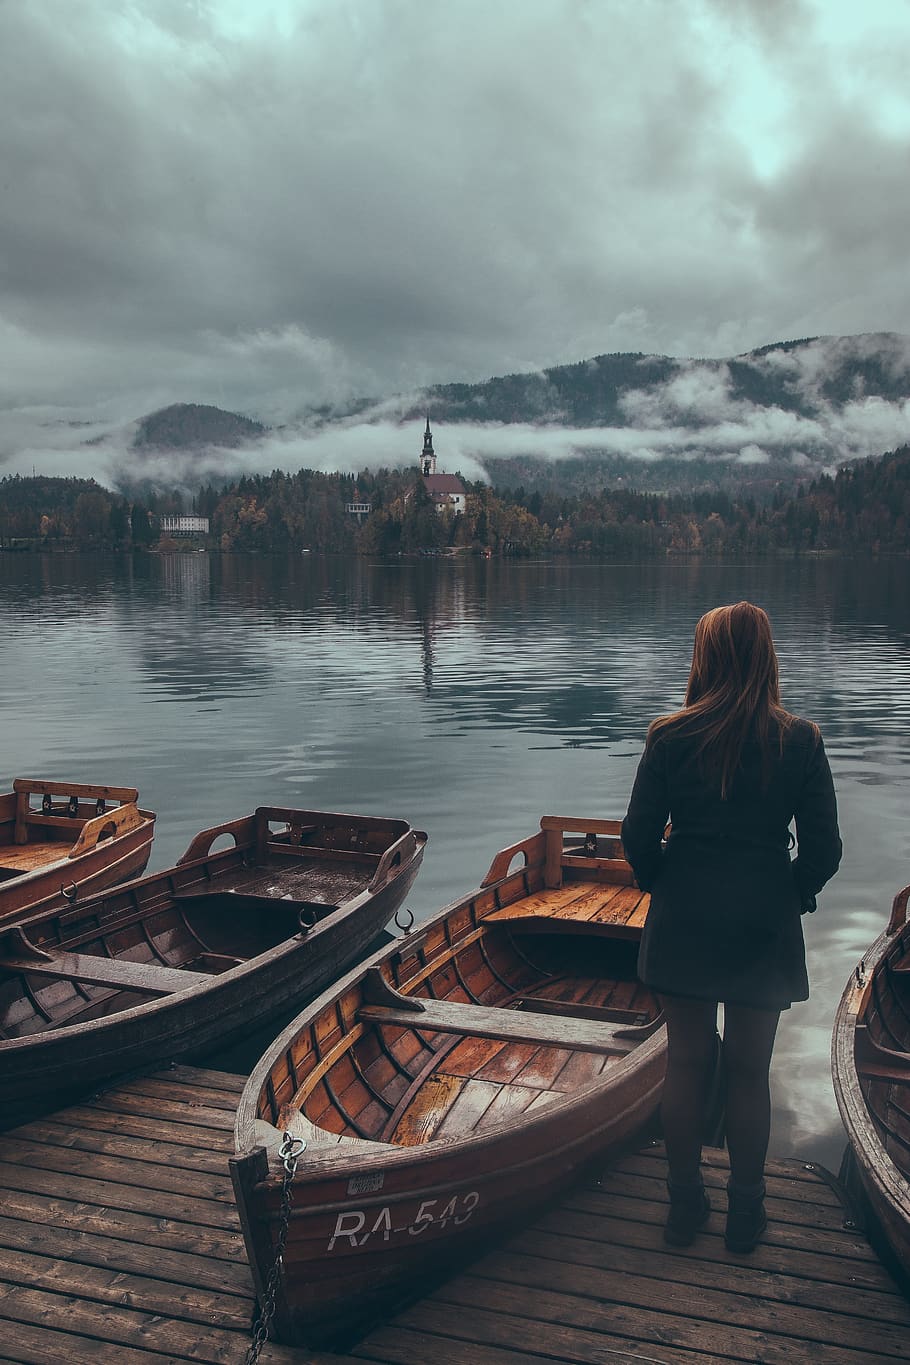 woman standing by the wooden boats at the lake under grey cloudy sky